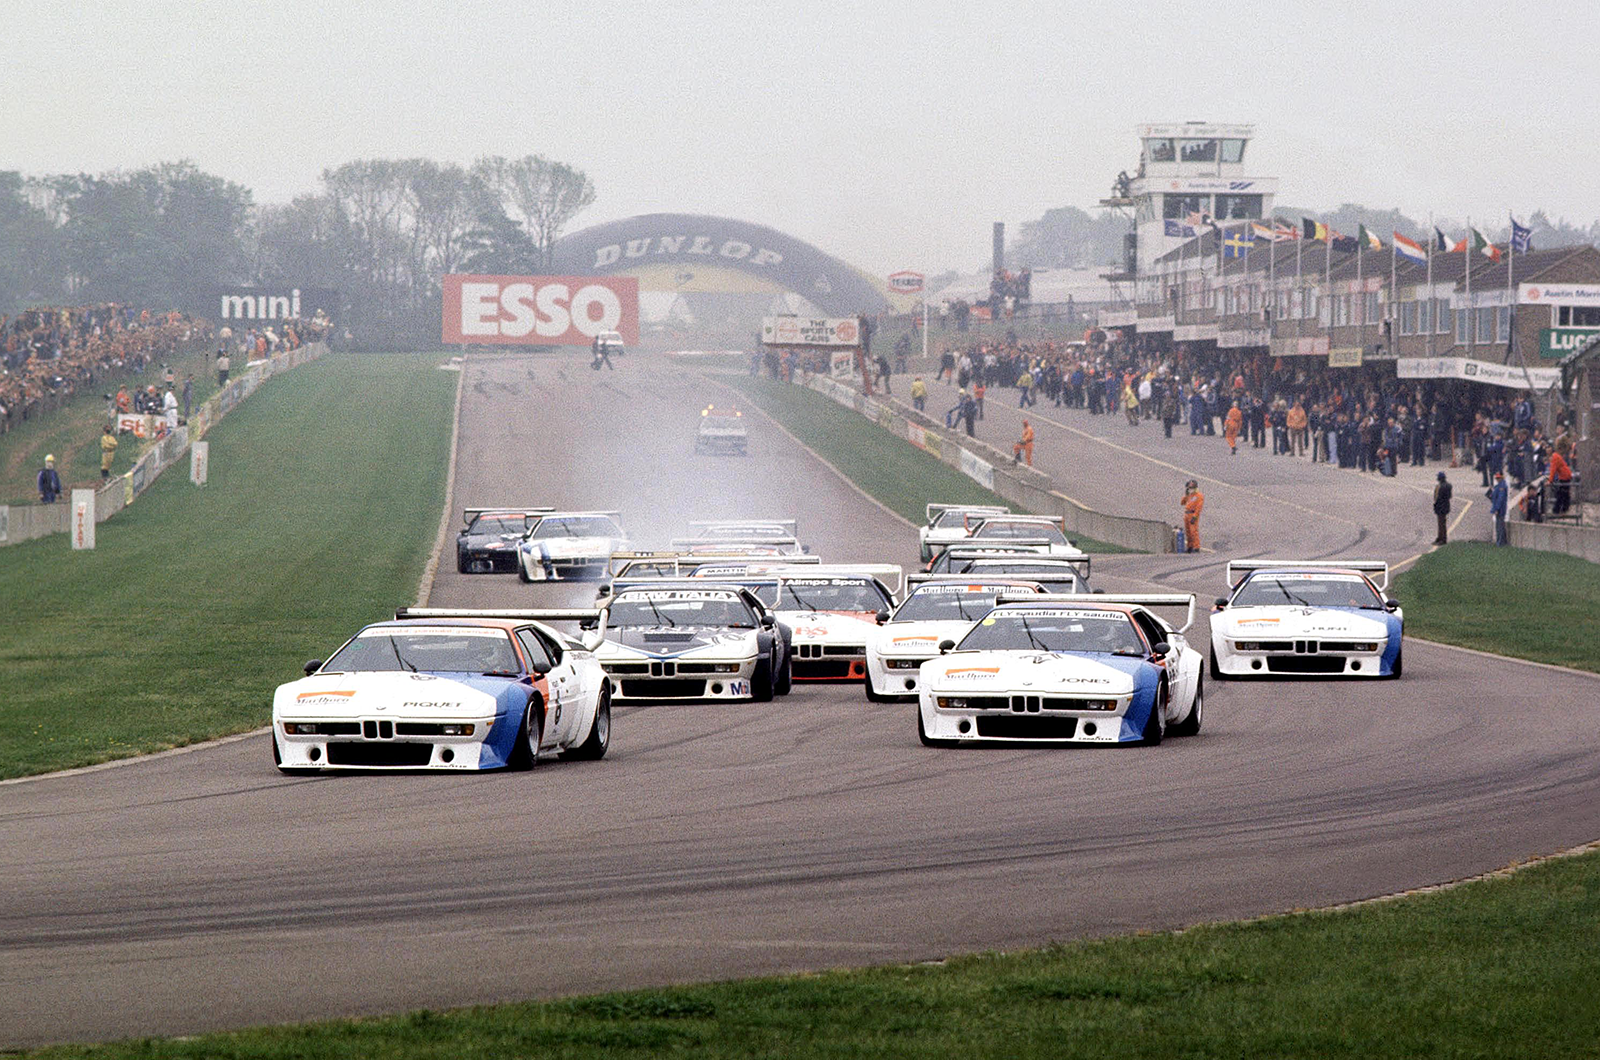 M1 Procars to light up Goodwood Members’ Meeting